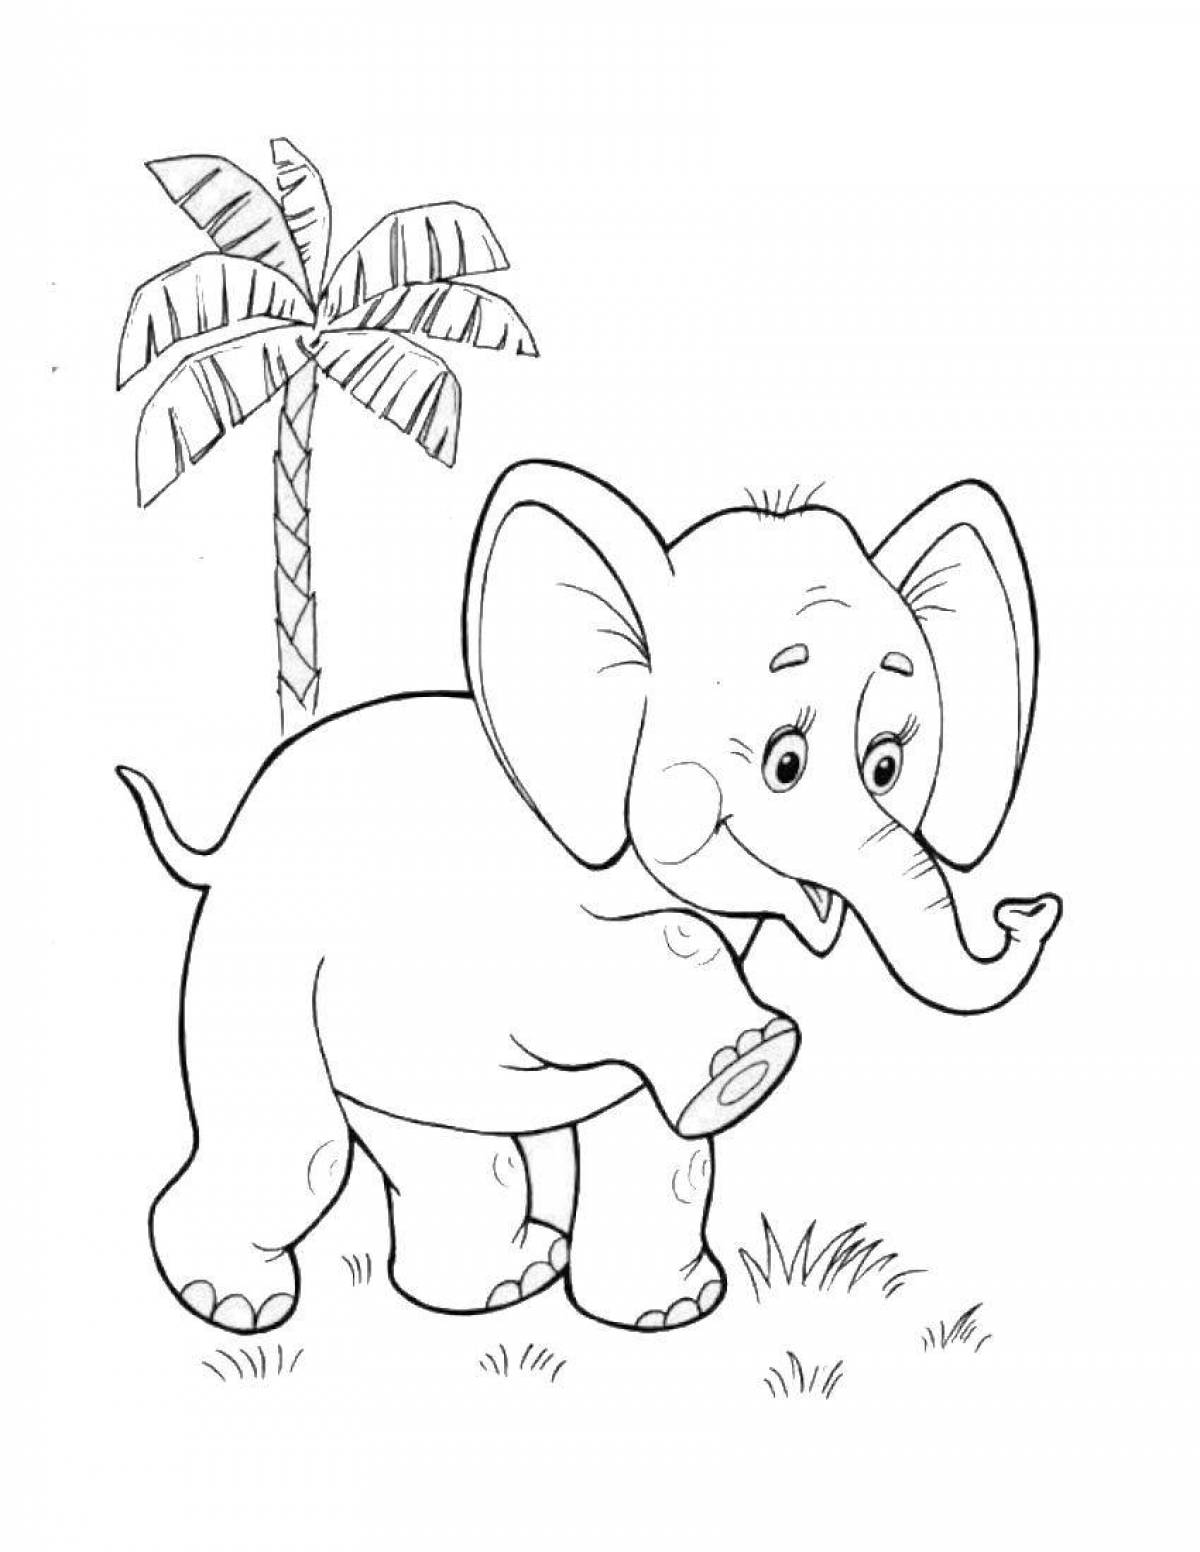 Delightful coloring pages animals of cold countries